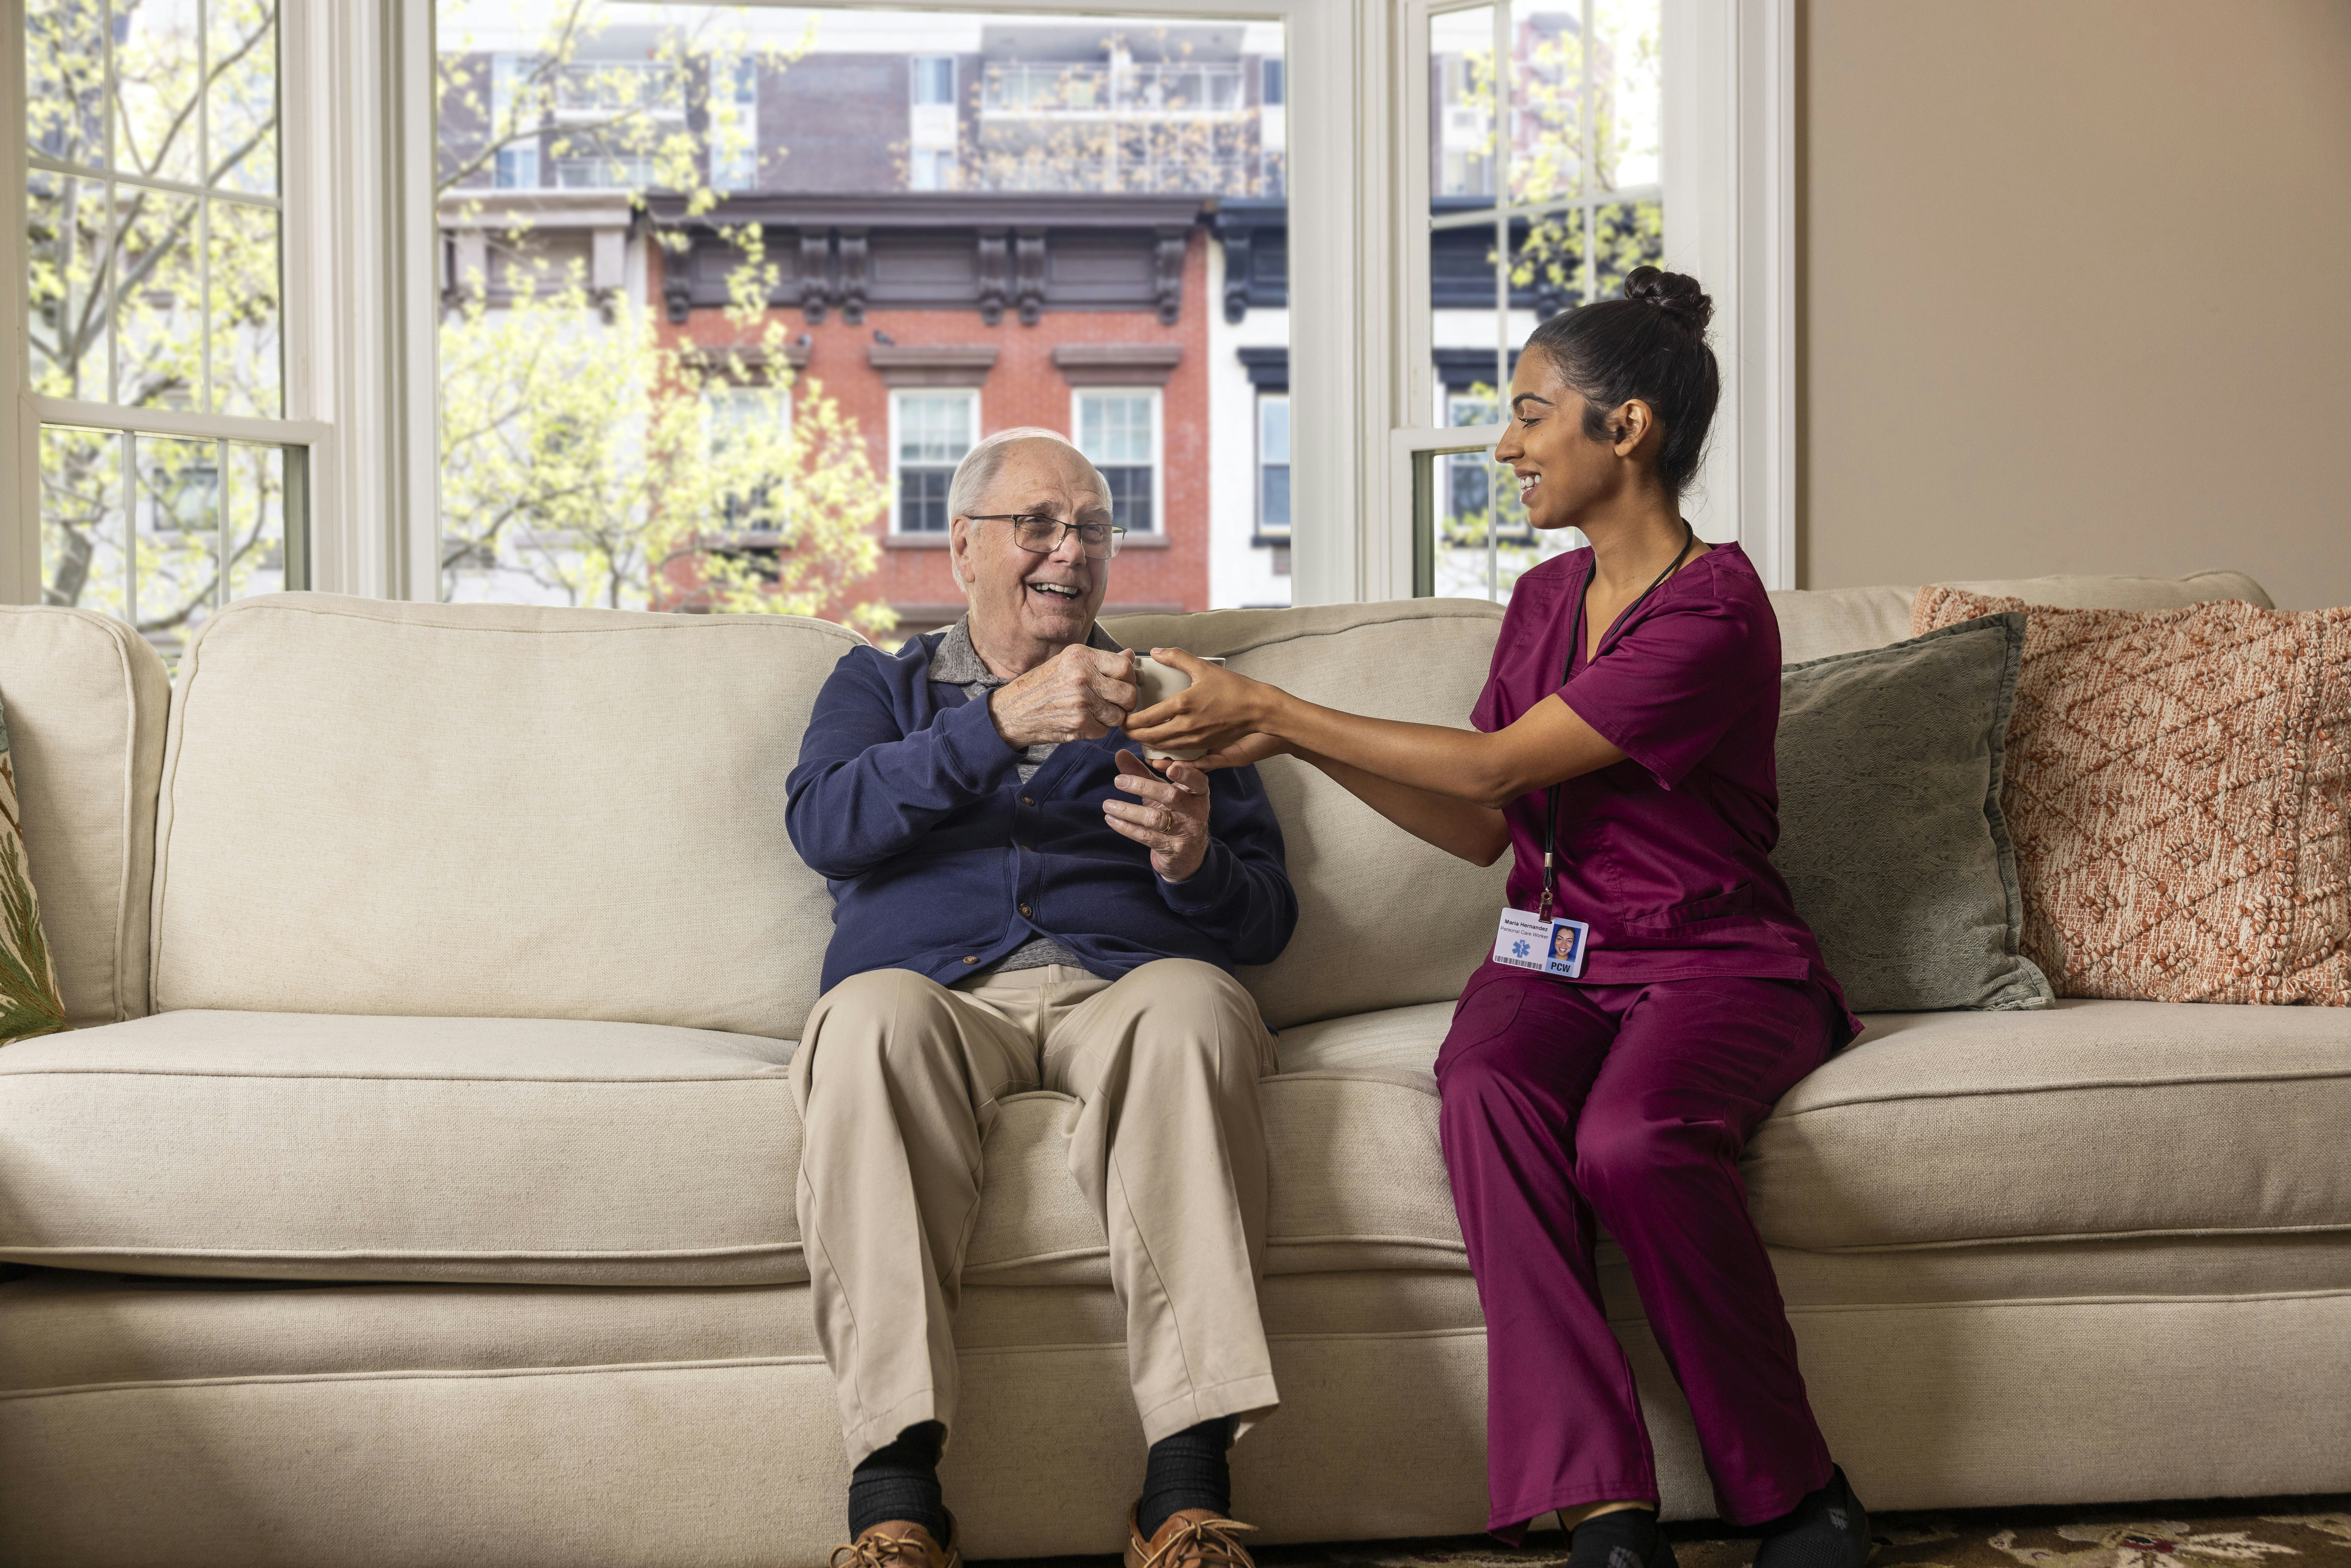 A nurse in magenta scrubs sits on a couch with an older patient and hands him a cup of tea